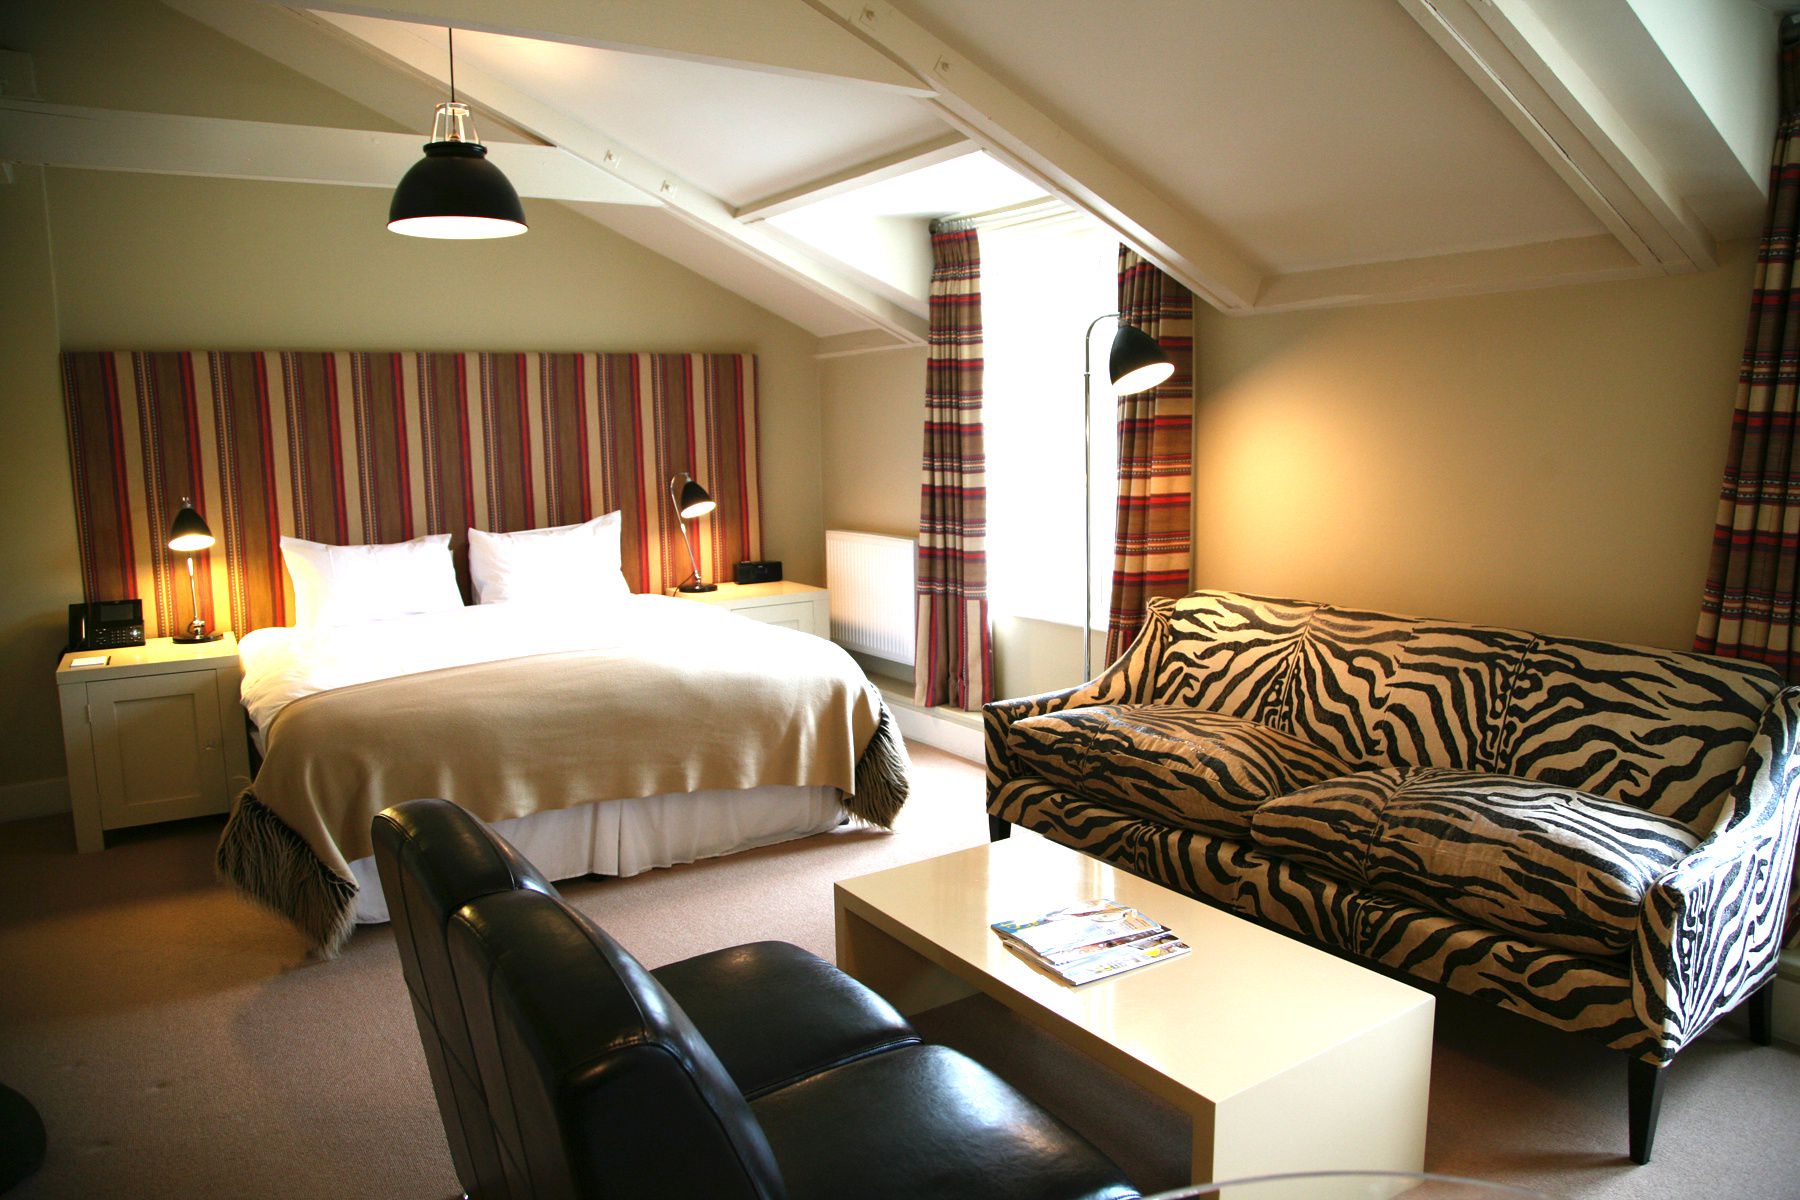 Milsoms Hotels - boutique hotels and restaurants in Essex & Suffolk - Cool Places to Stay in the UK